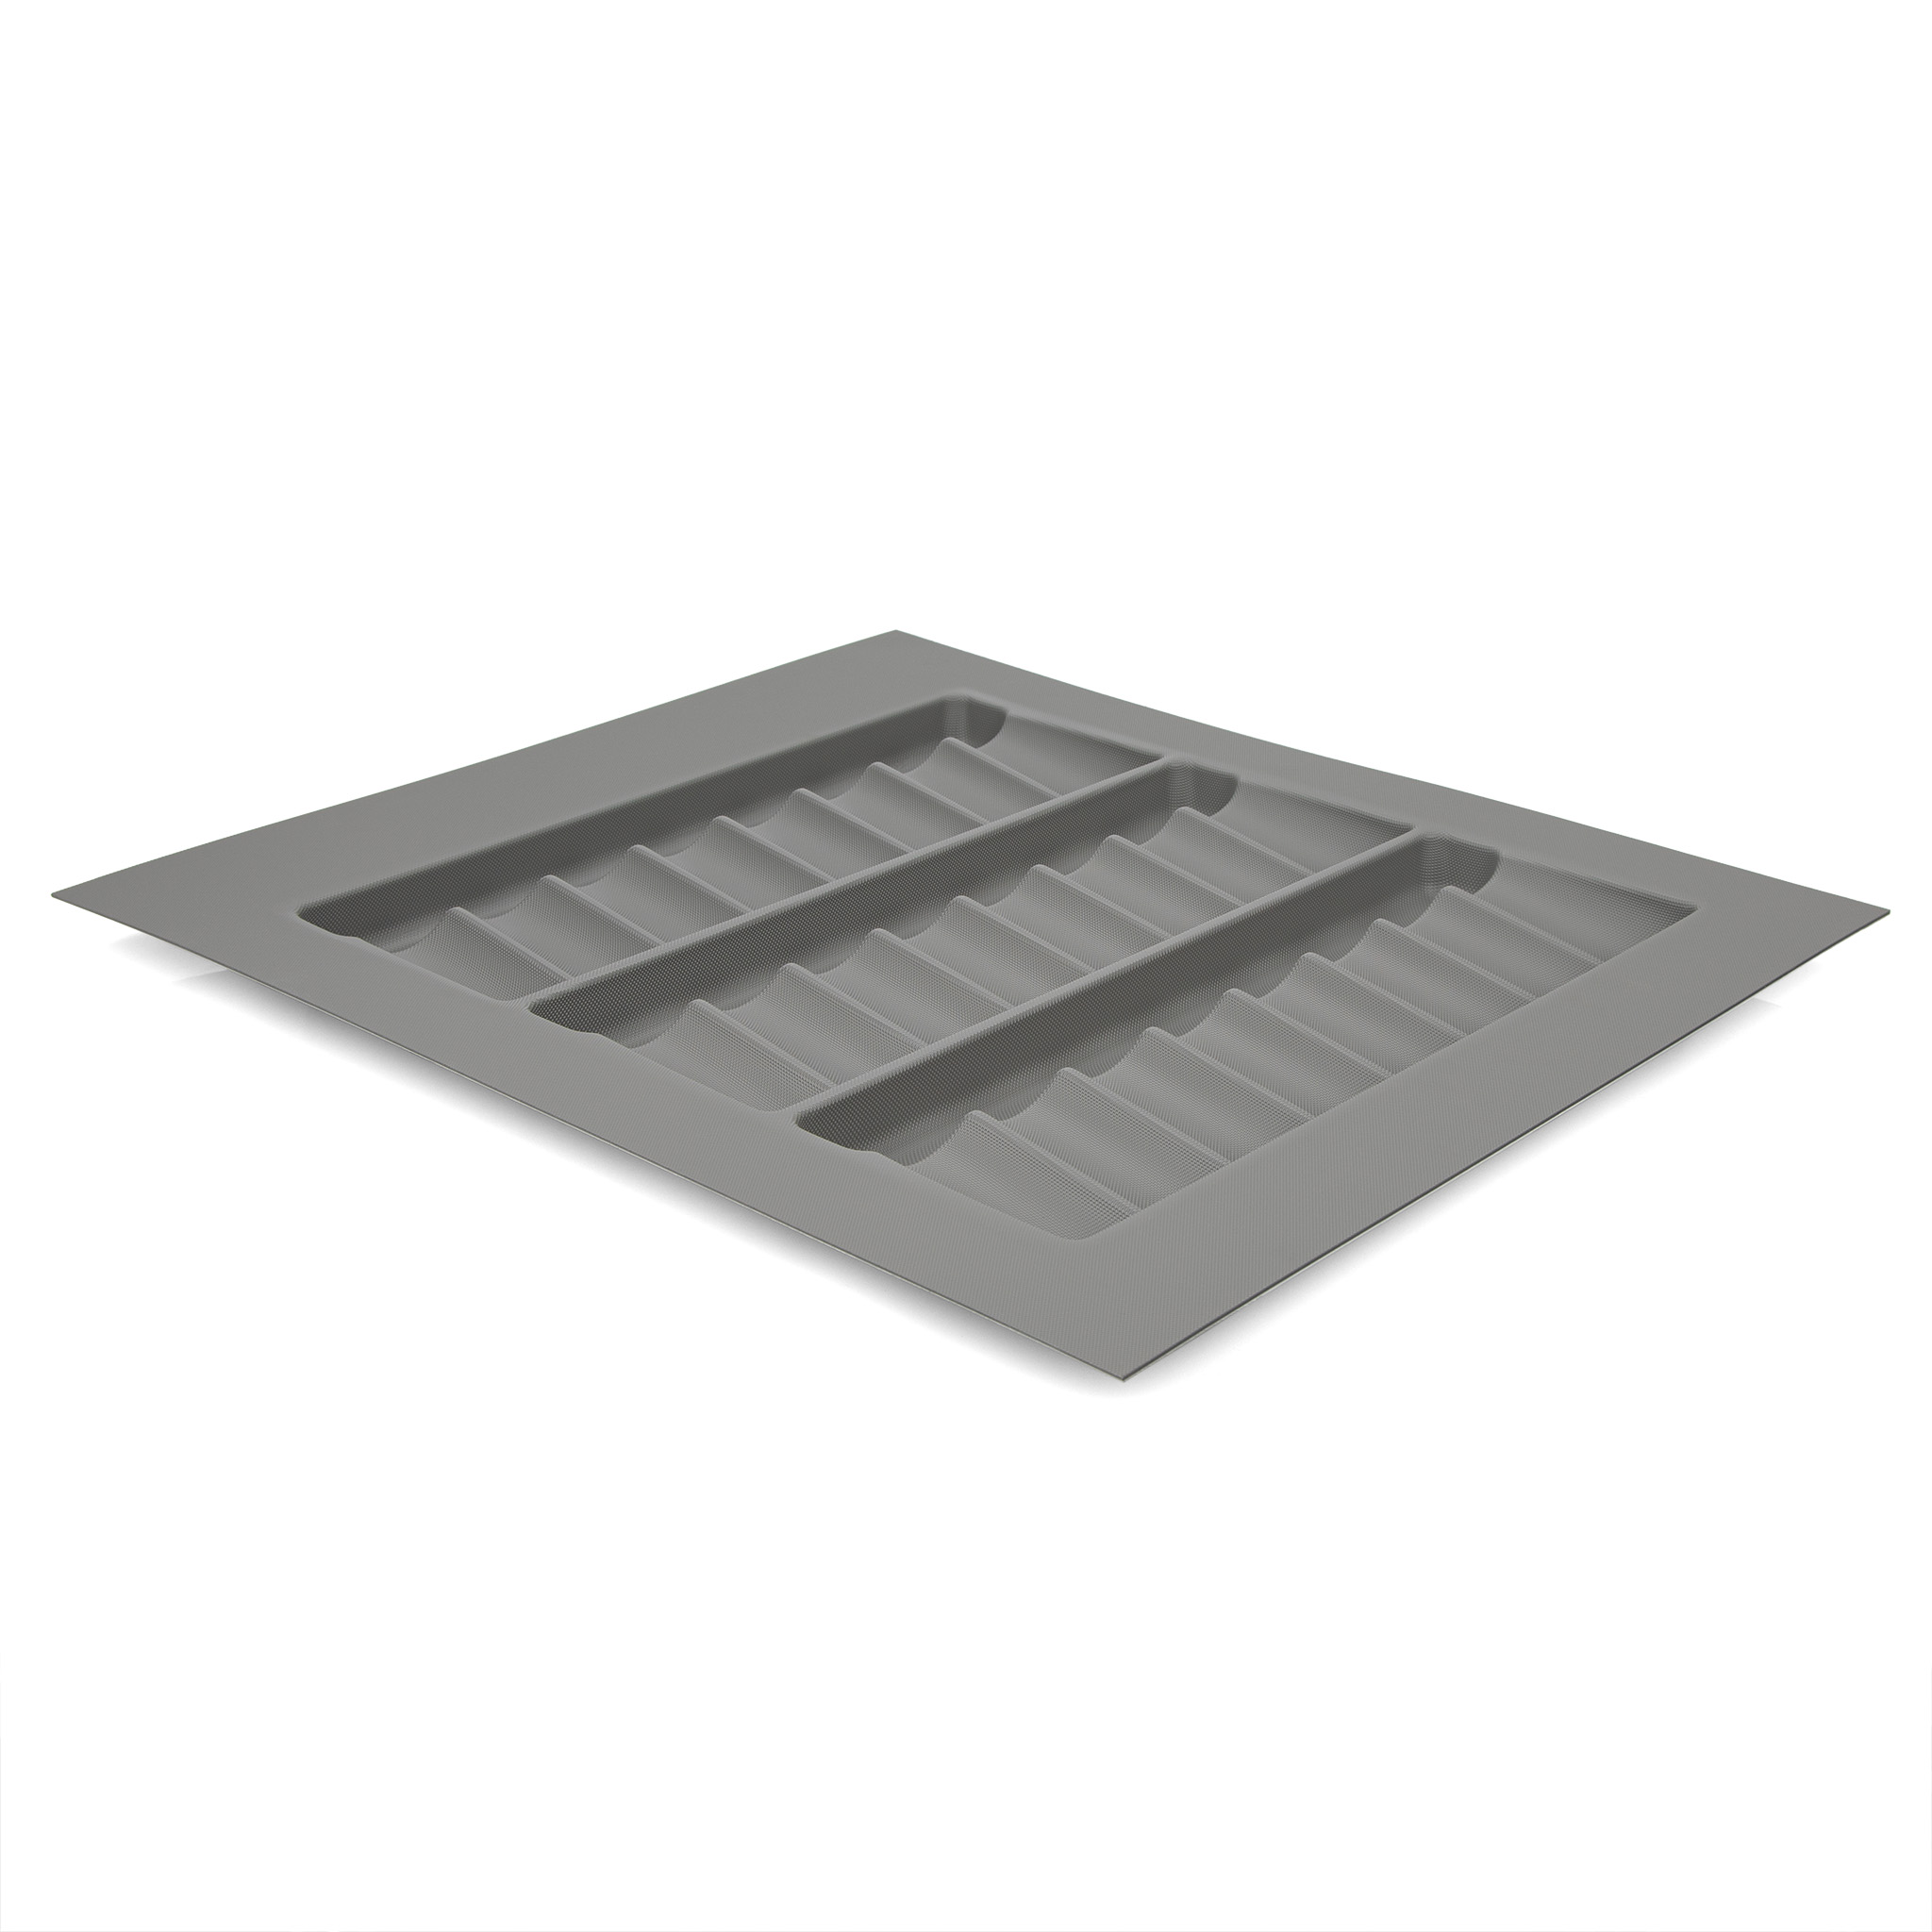 Area Spice Tray Organizers, 390mm - 480mm, Grey Matte Textured